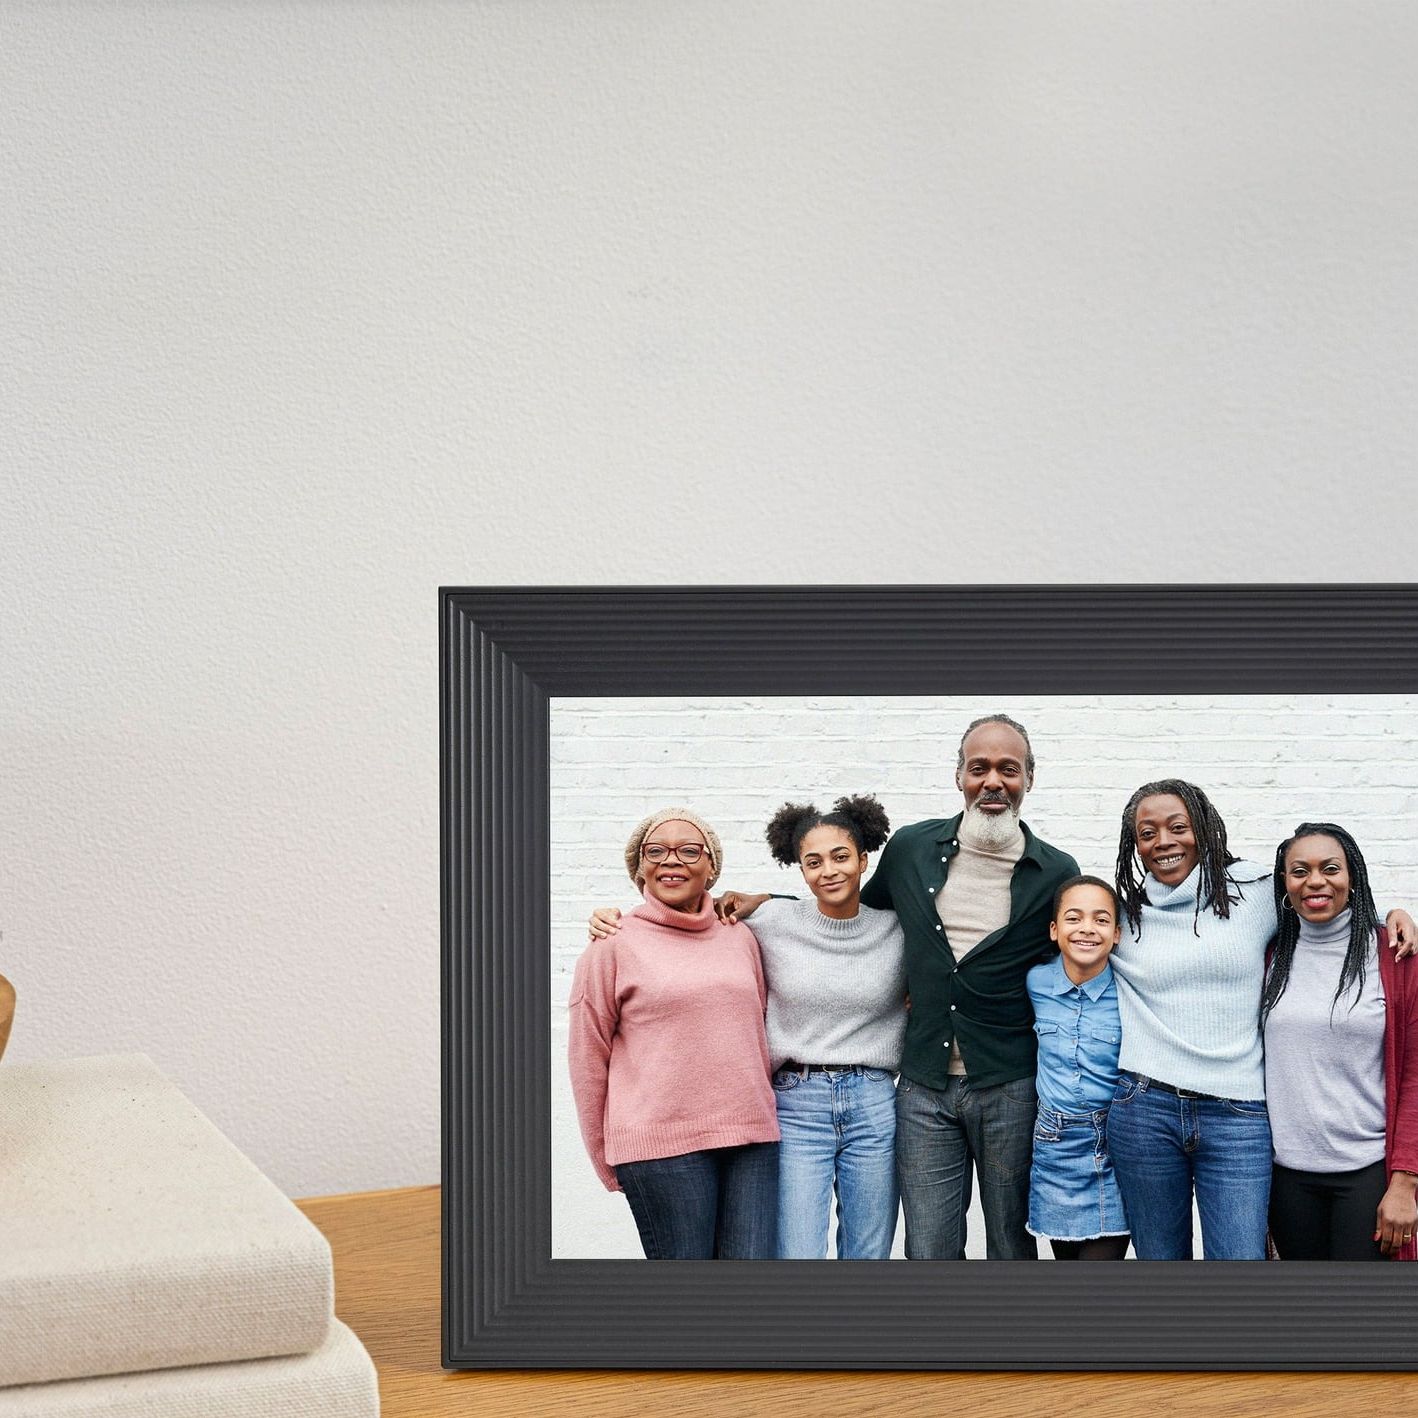 These Digital Picture Frames Make Long-Distance Photo Sharing a Cinch